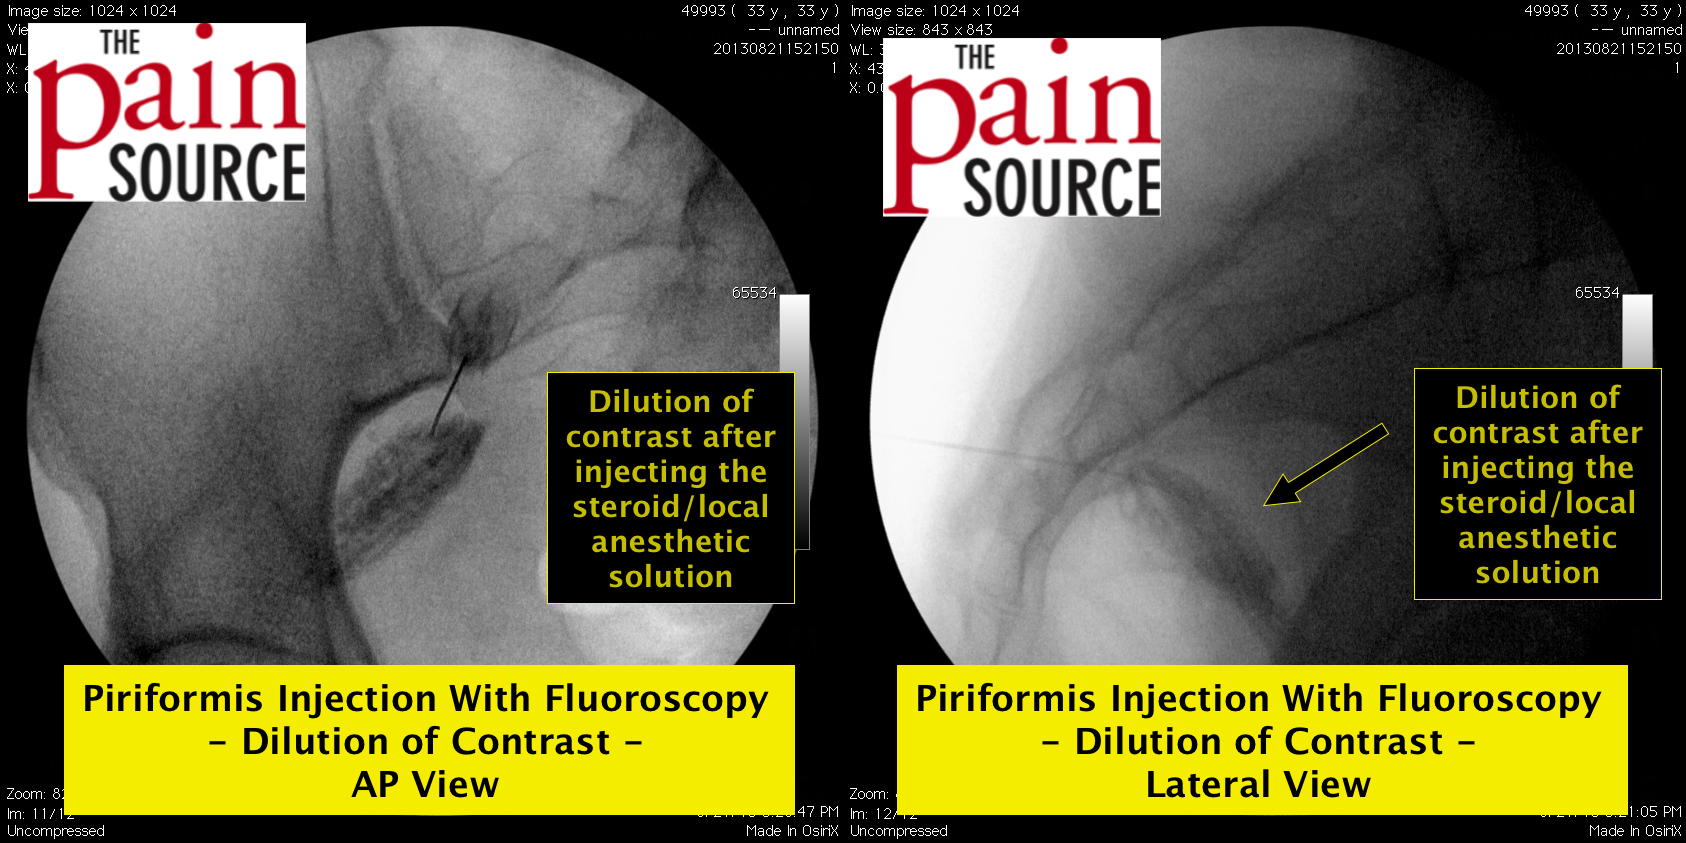 Piriformis Muscle Injection With Fluoroscopy The Pain Source Makes Learning About Pain Painless